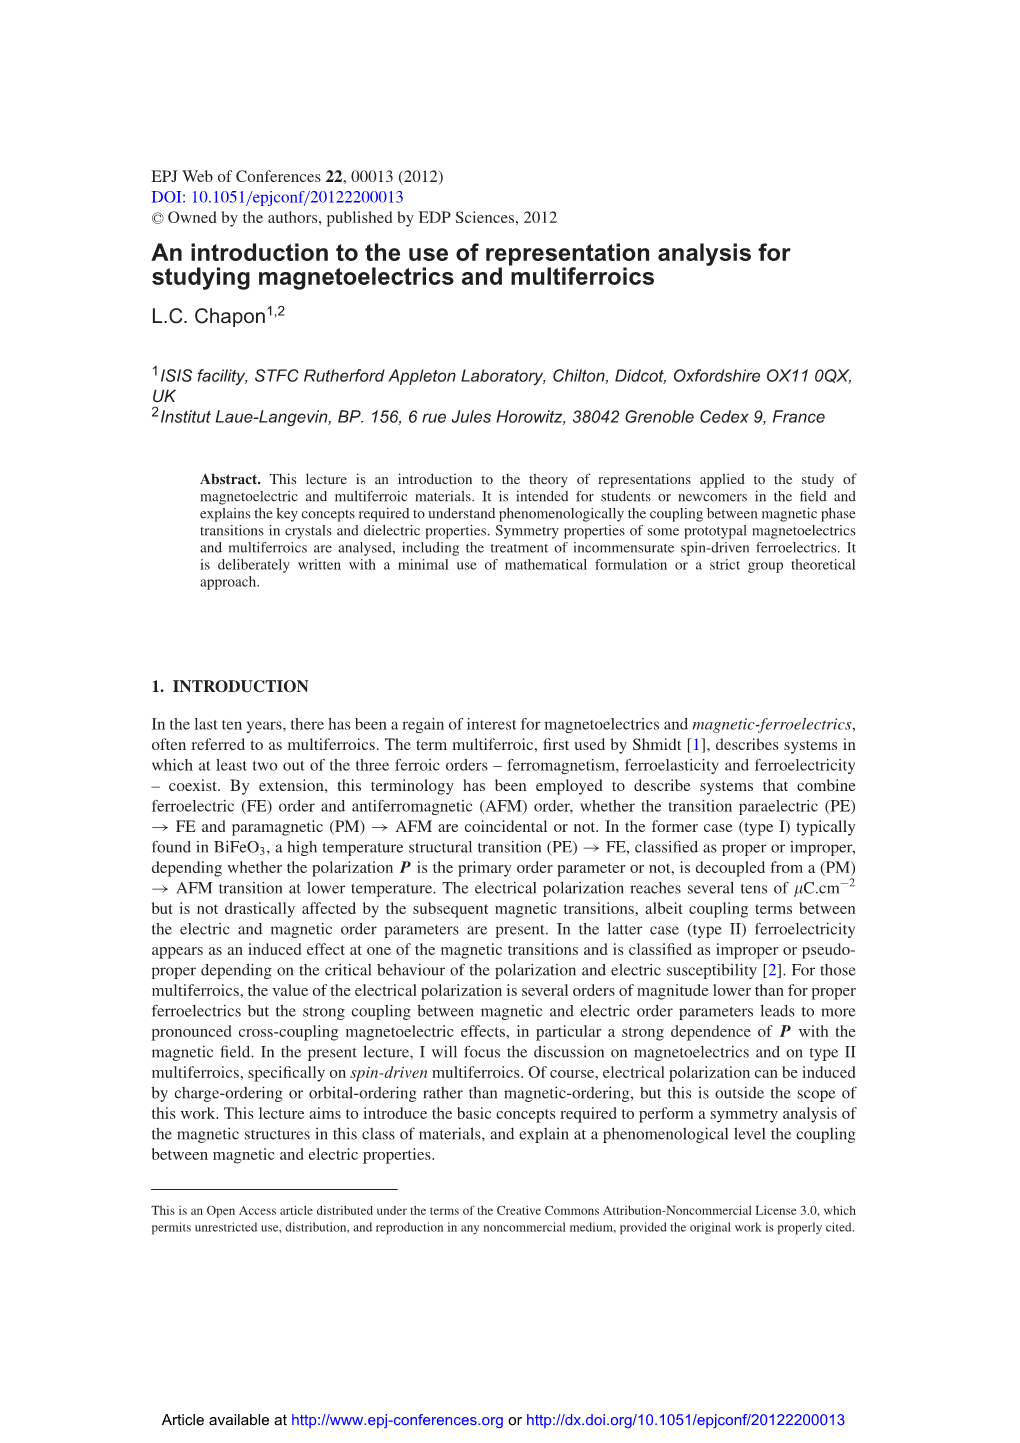 An Introduction to the Use of Representation Analysis for Studying Magnetoelectrics and Multiferroics L.C